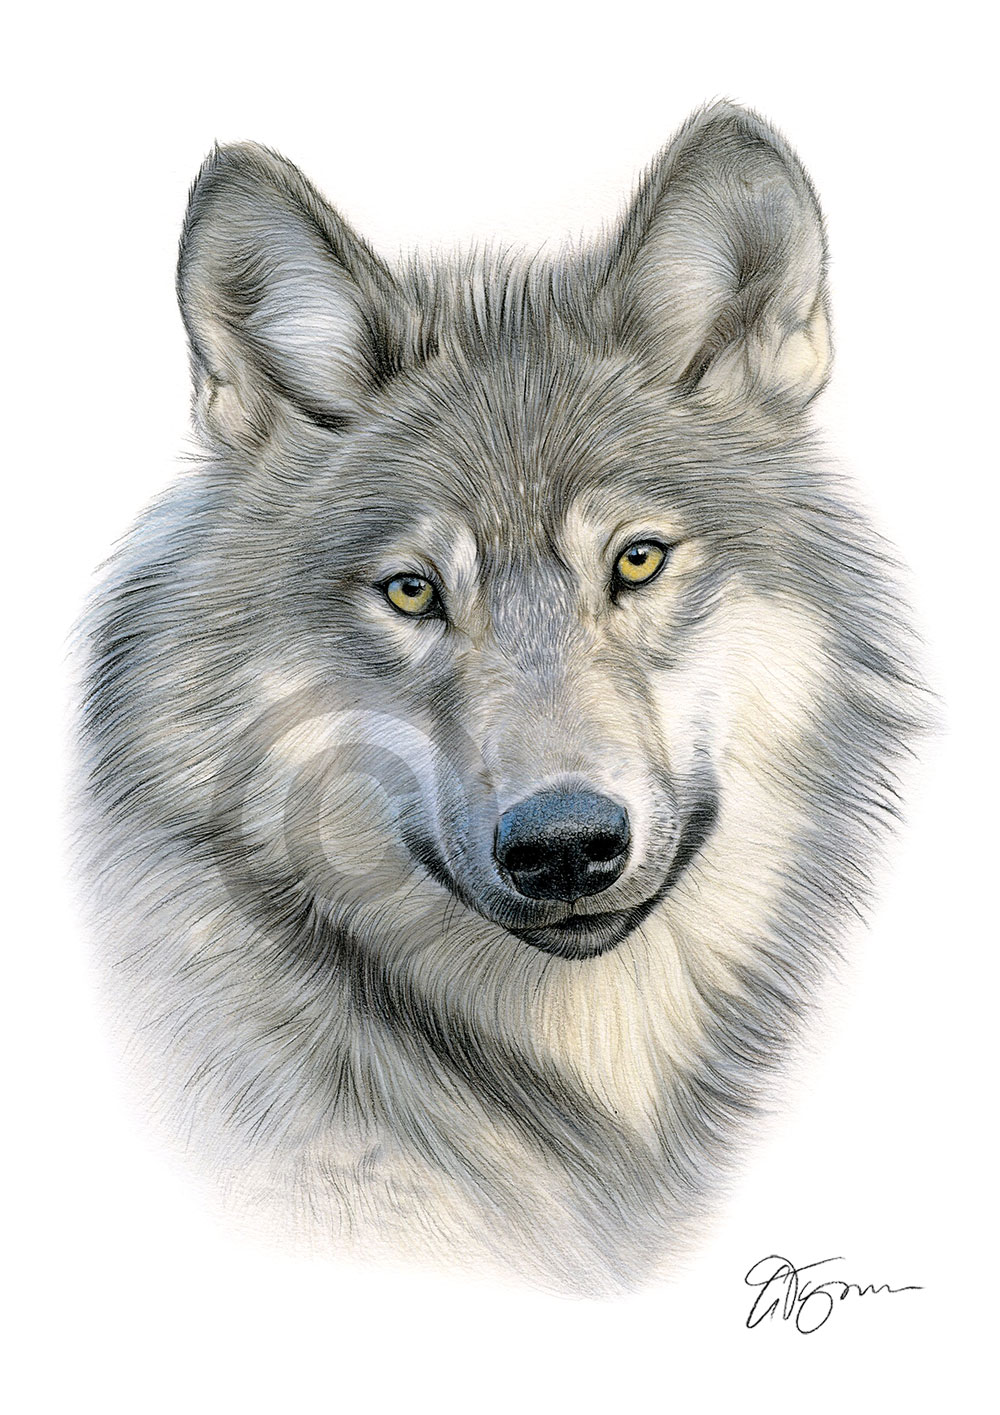 Colour pencil drawing of a Grey Wolf by artist Gary Tymon